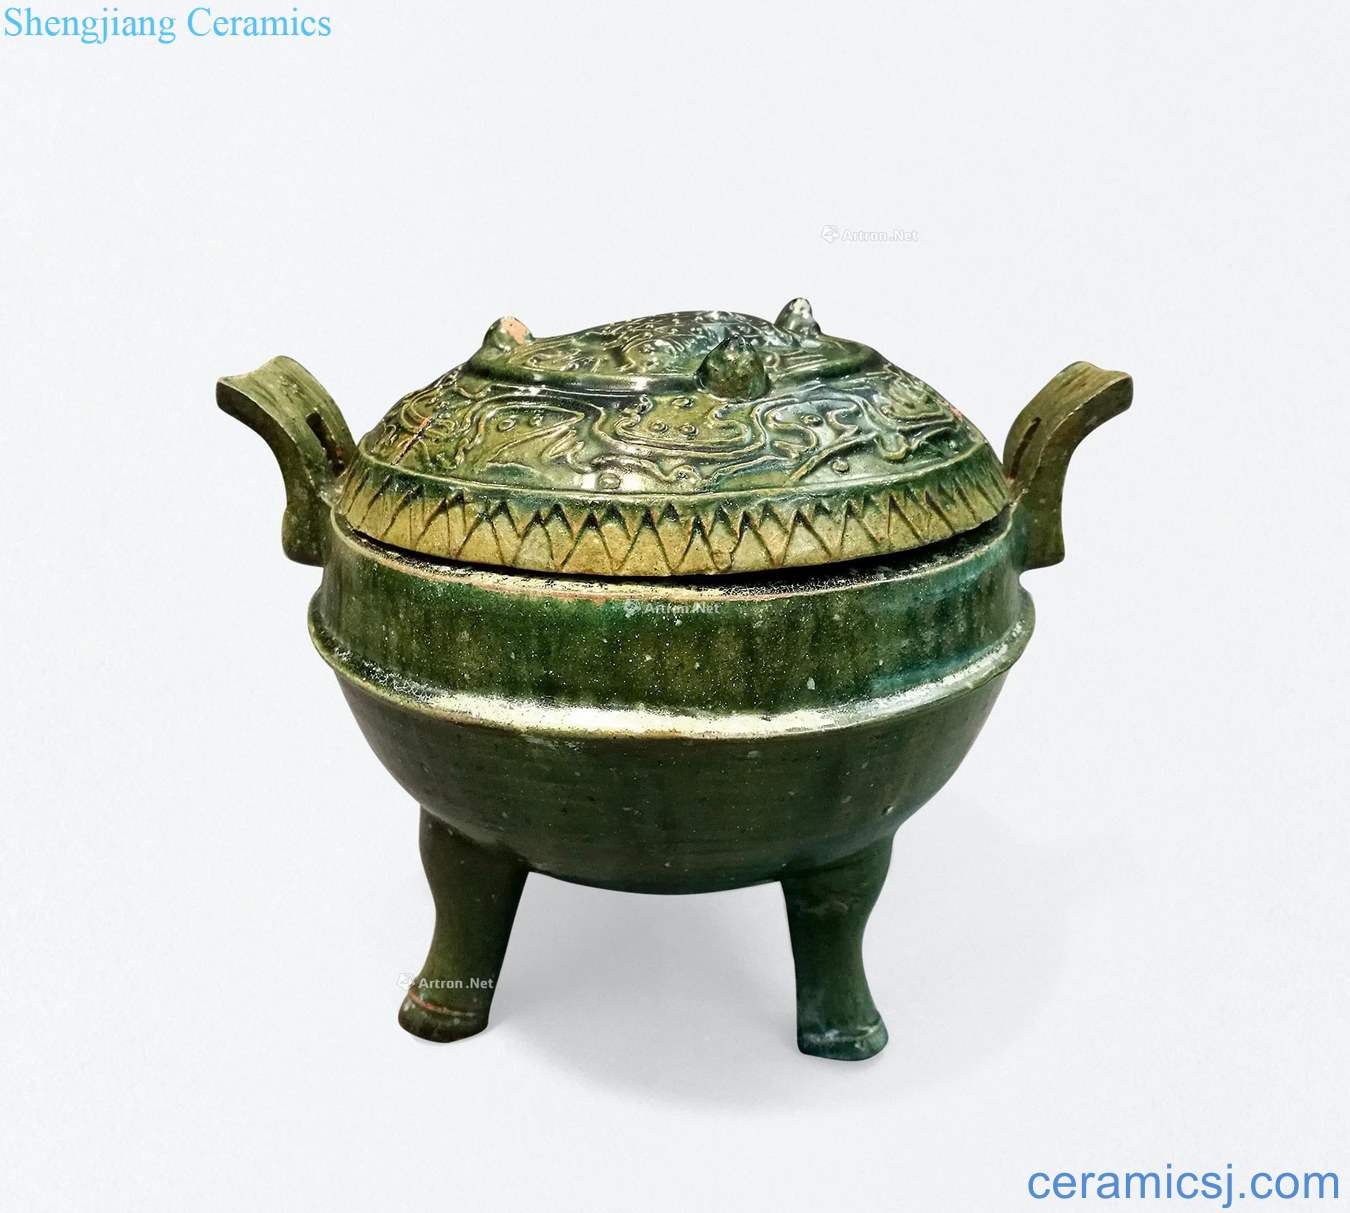 The han dynasty Green glaze Pisces TaoDing lines